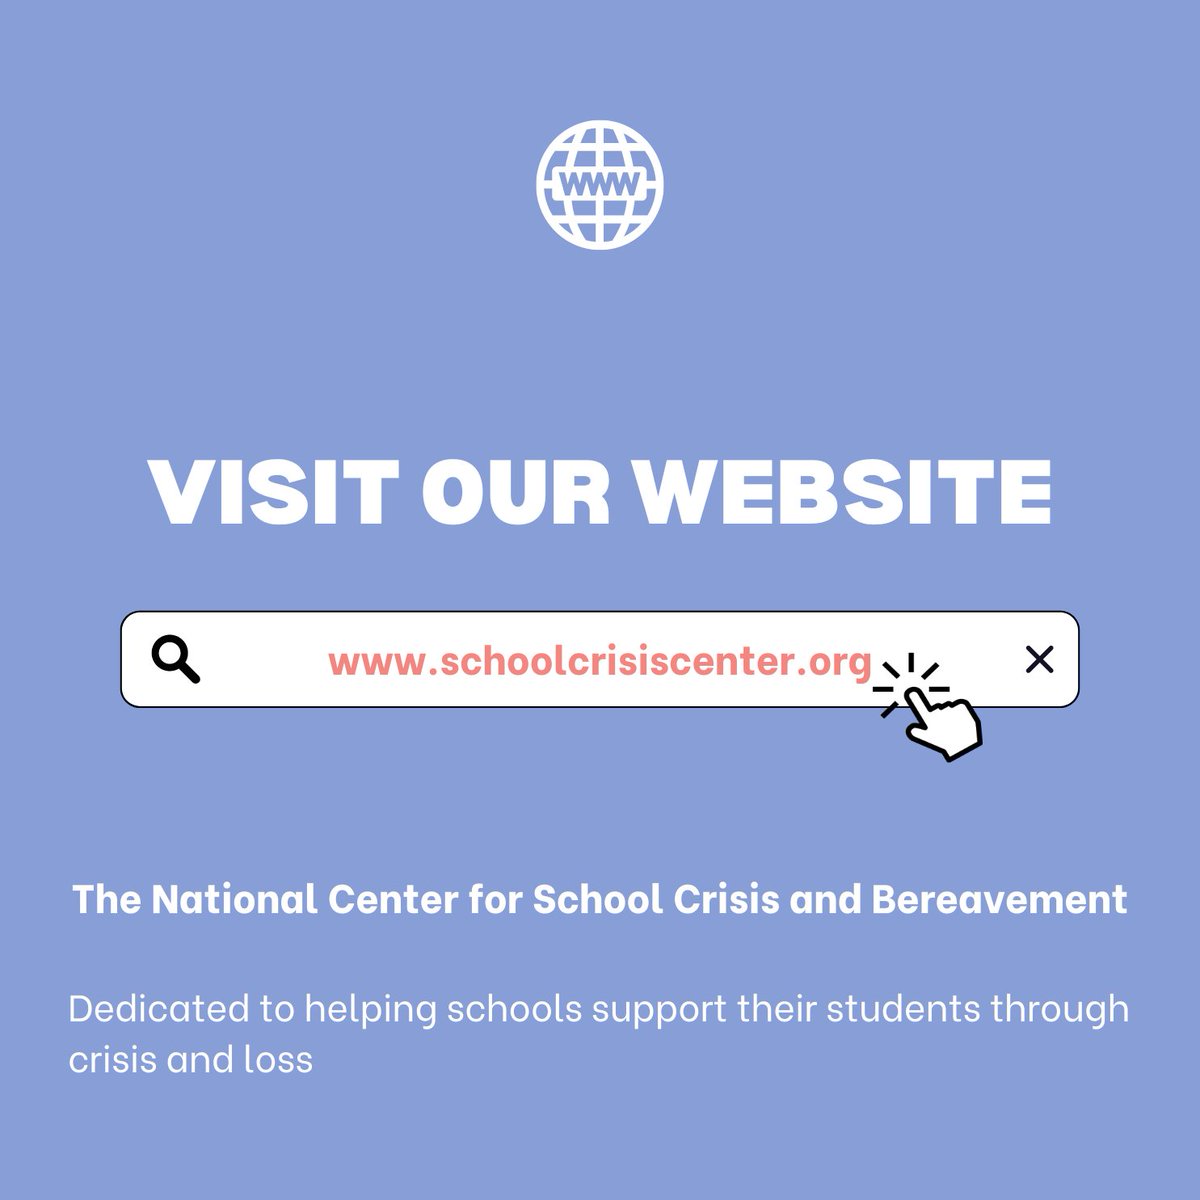 Empowering schools to navigate crisis and loss with compassion and resilience. Explore more at schoolcrisiscenter.org #SupportingStudents #SchoolCrisisCenter #grievingstudents